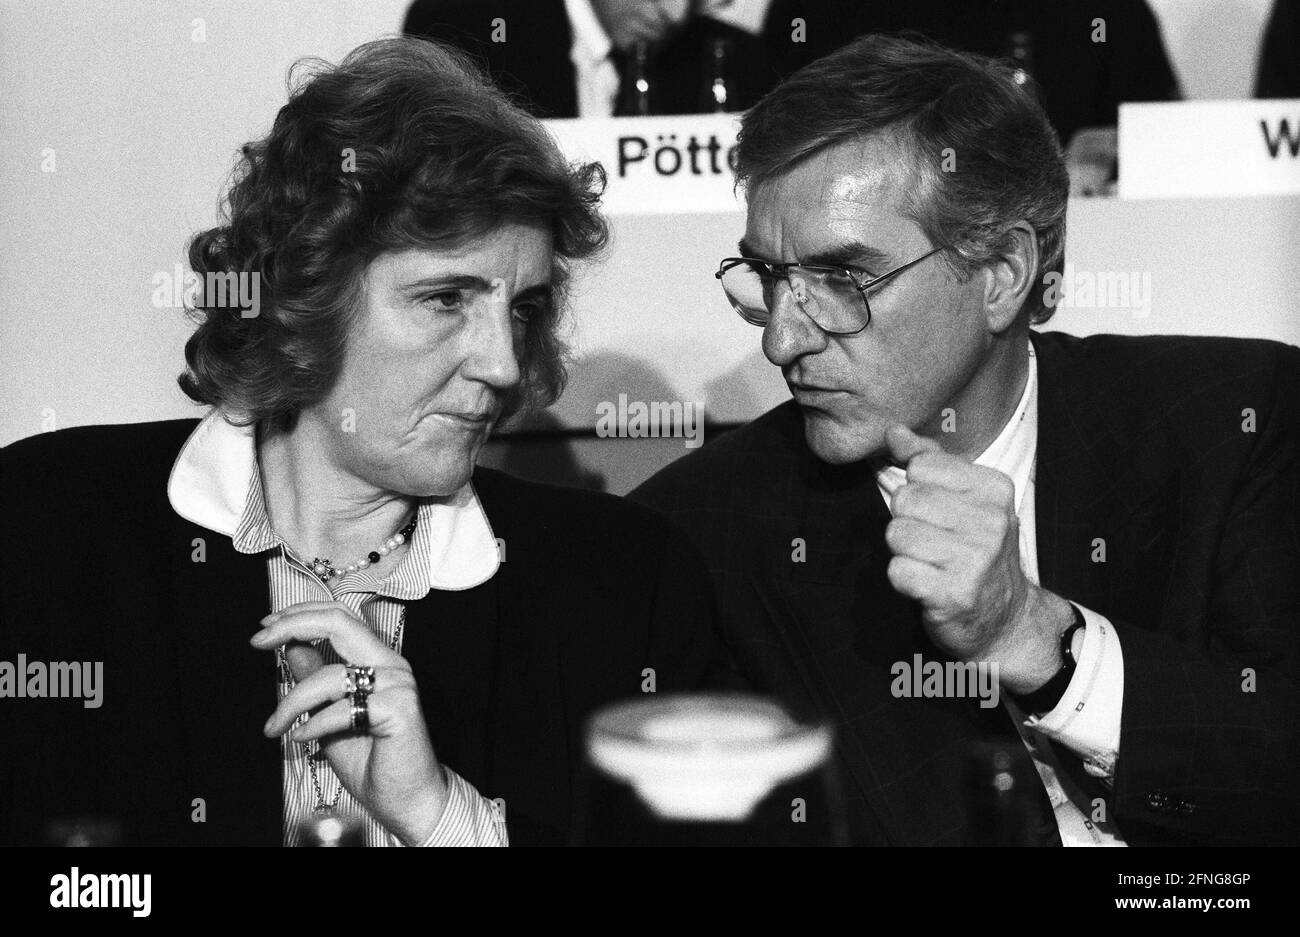 Germany, Hanover, 13.10.1989. Archive No: 09-57-11 CDU state party conference-Lower Saxony Photo: Josef Stock, Minister of the Interior-Lower Saxony and Birgit Breuel, Lower Saxony Minister of Finance [automated translation] Stock Photo